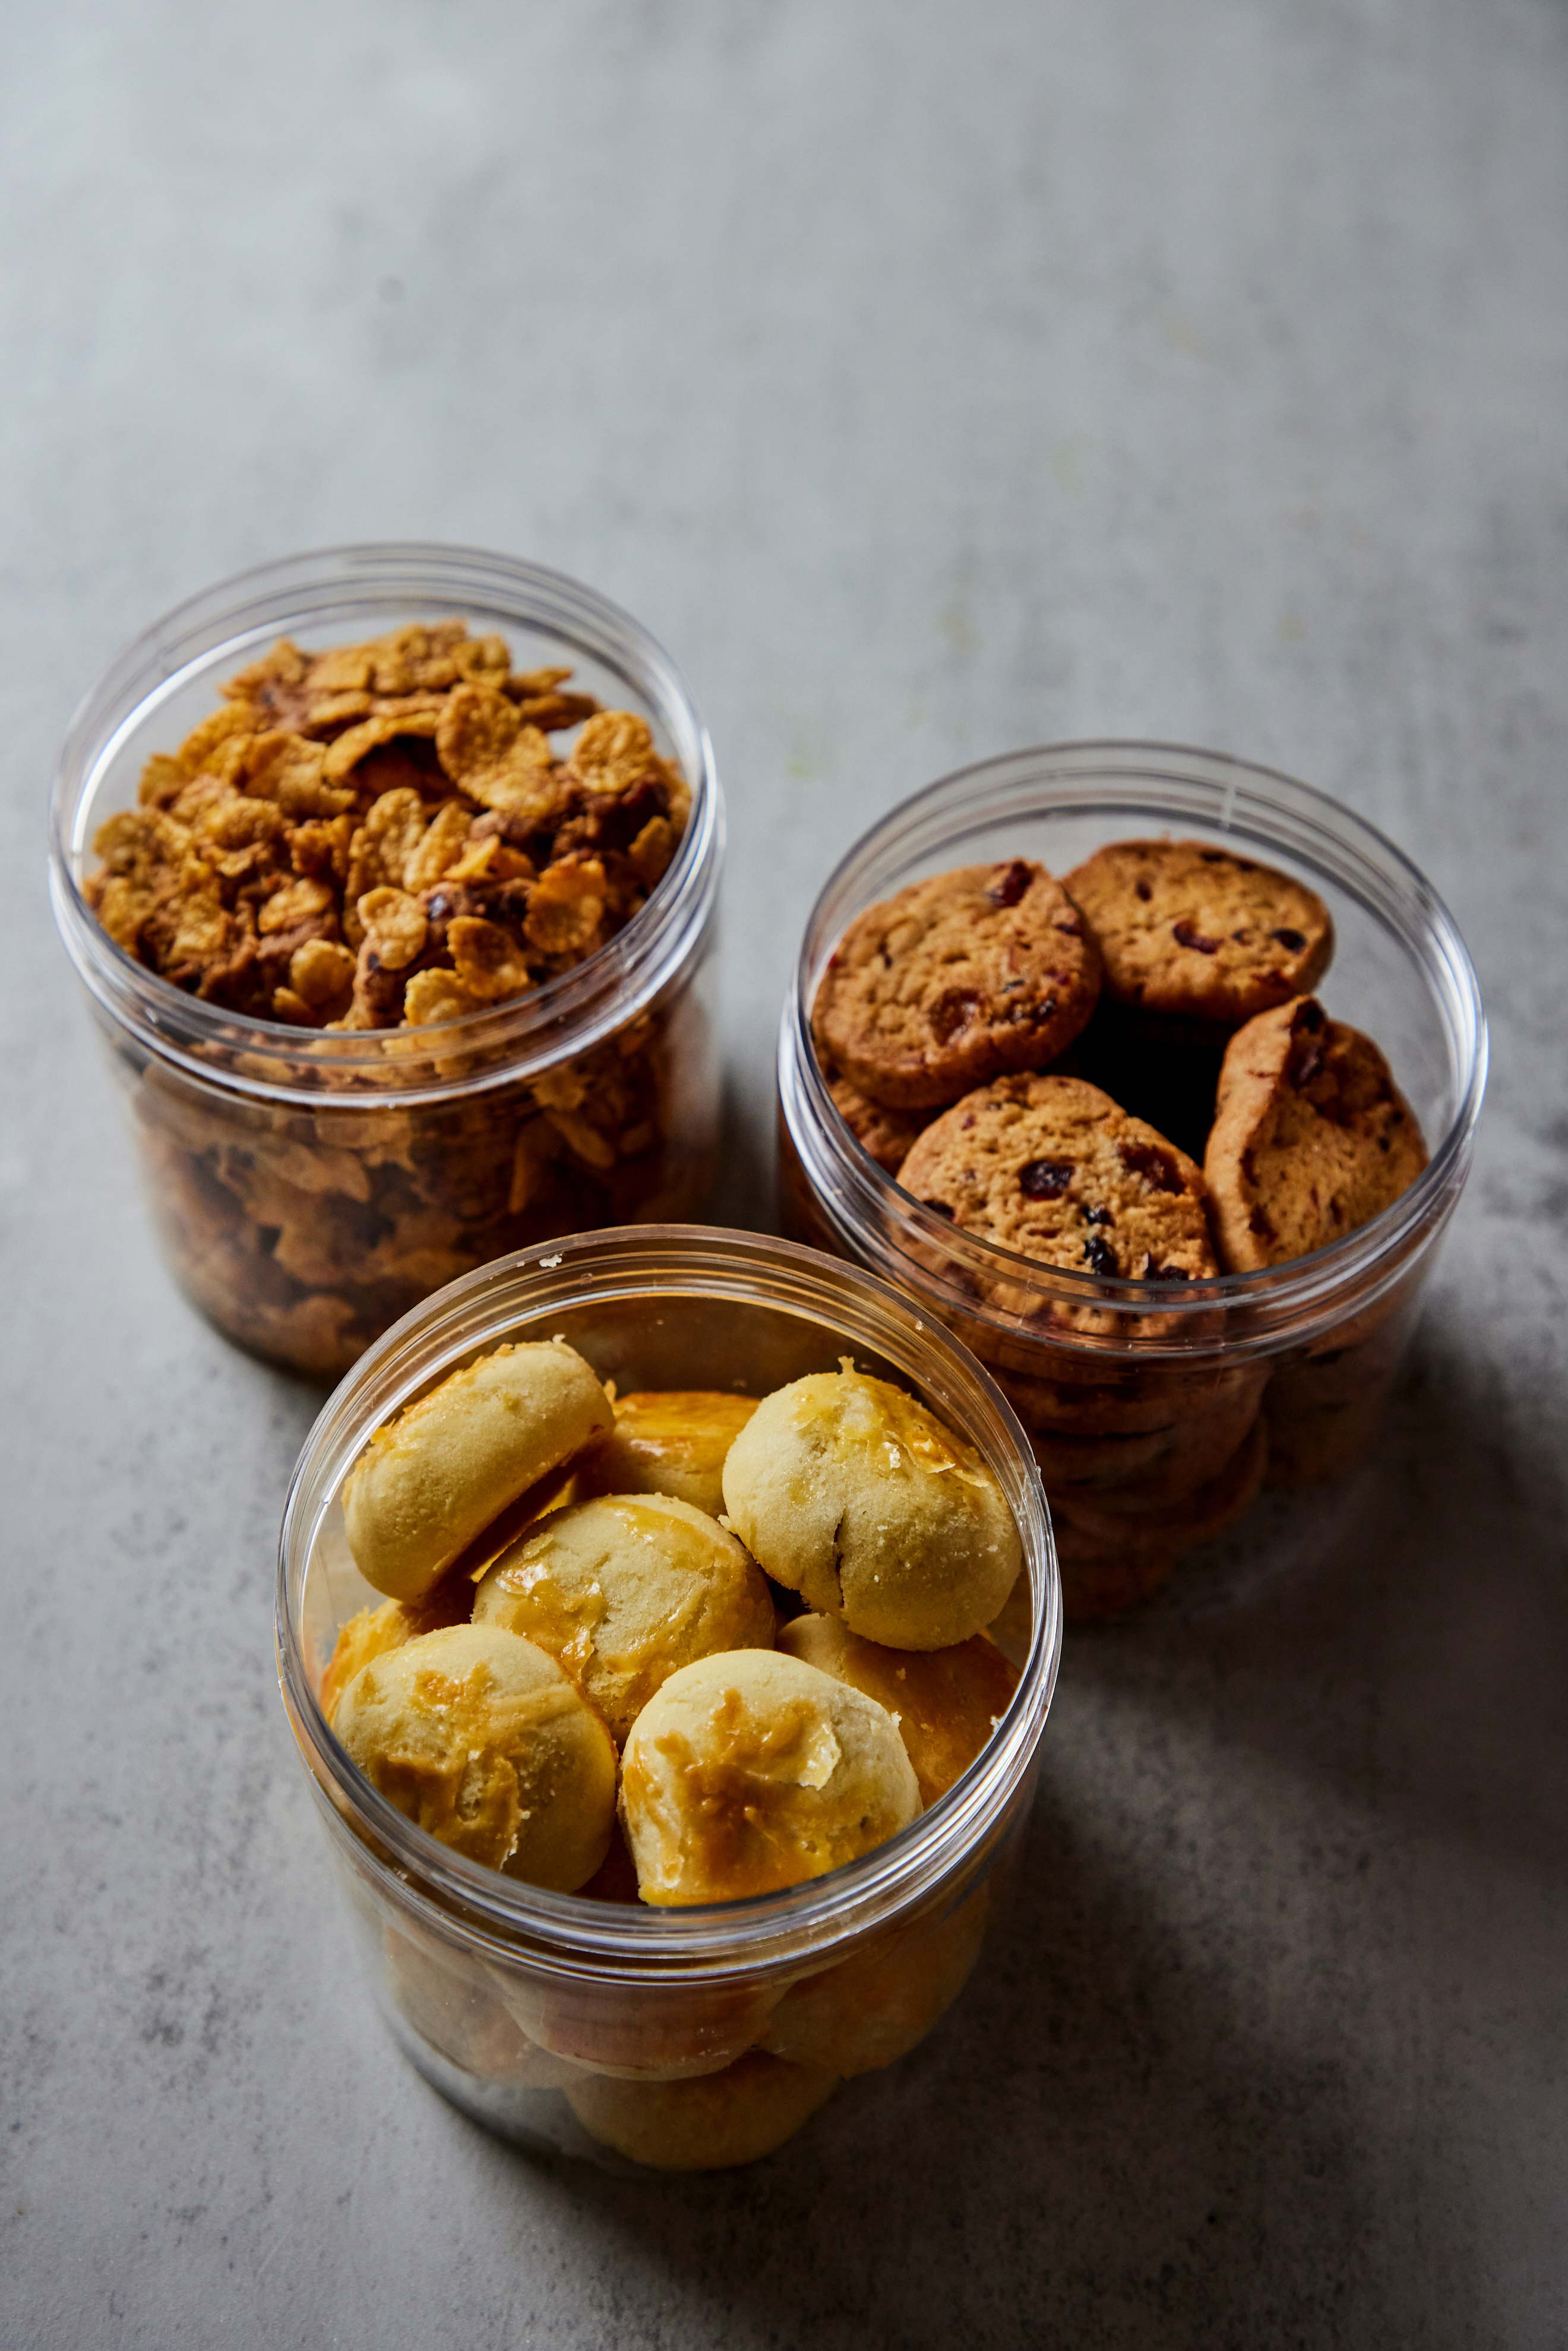 Assorted CNY snacks, from $18